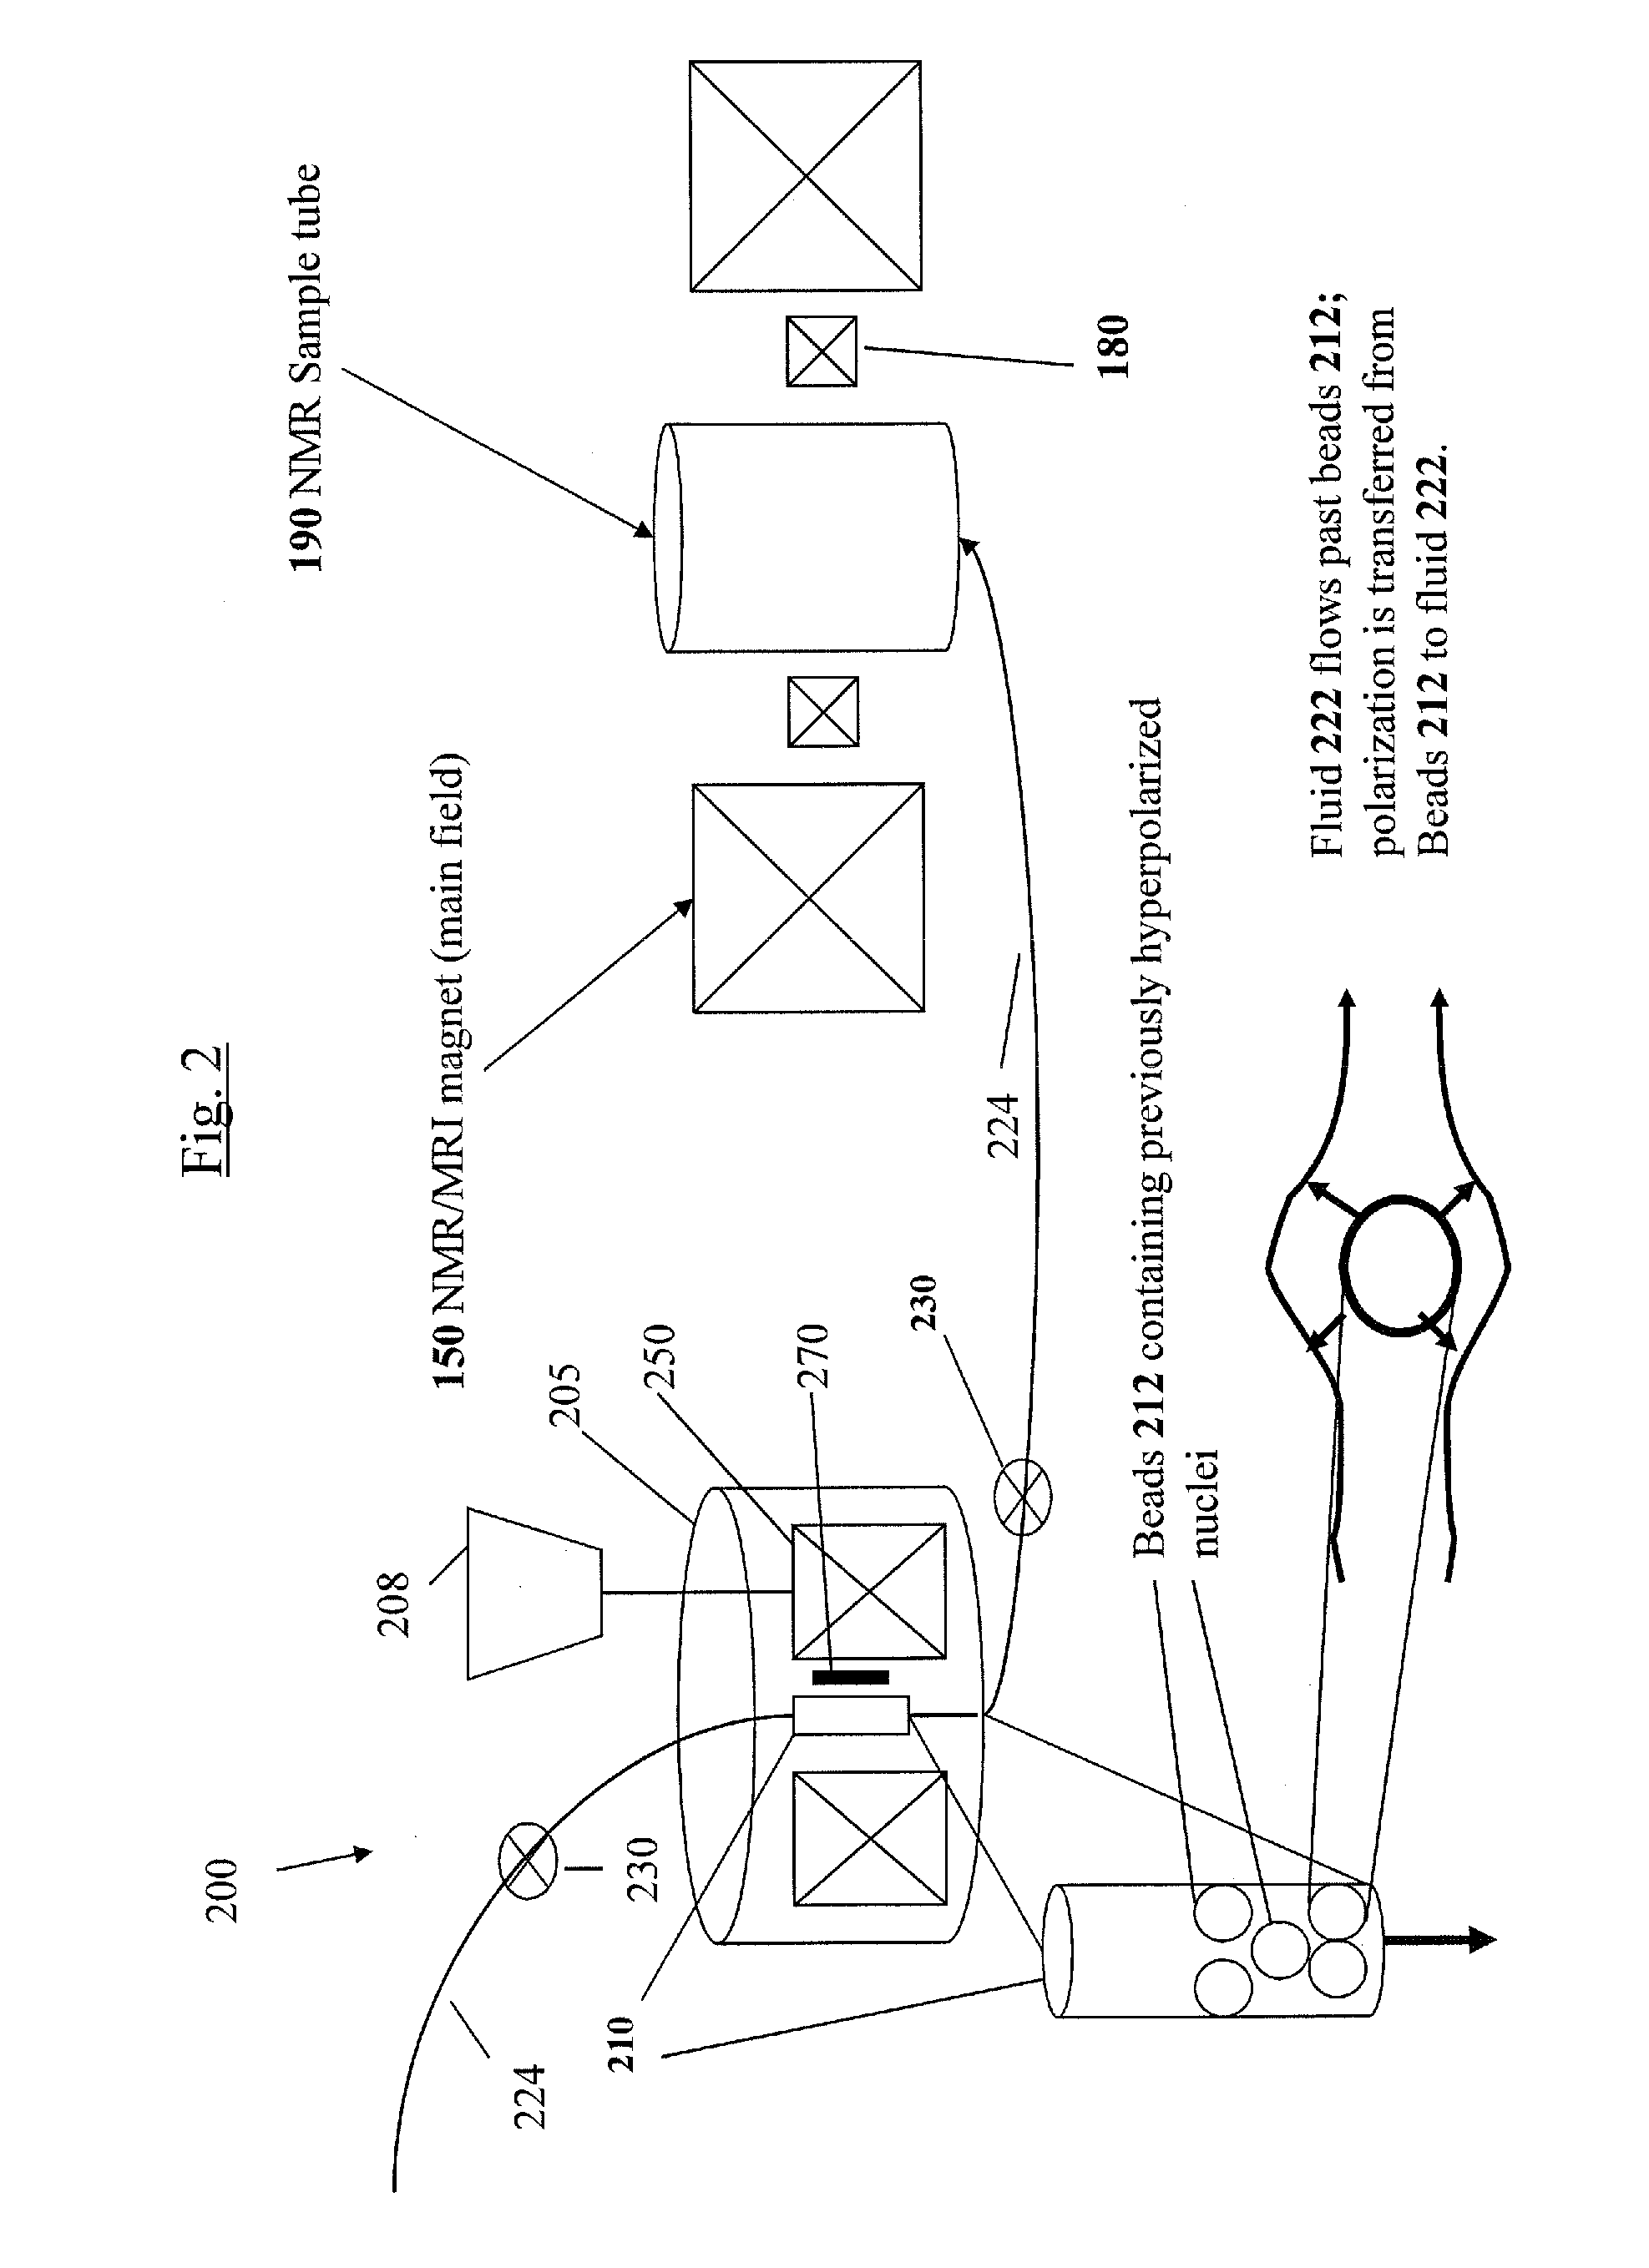 Hyperpolarization methods, systems and compositions